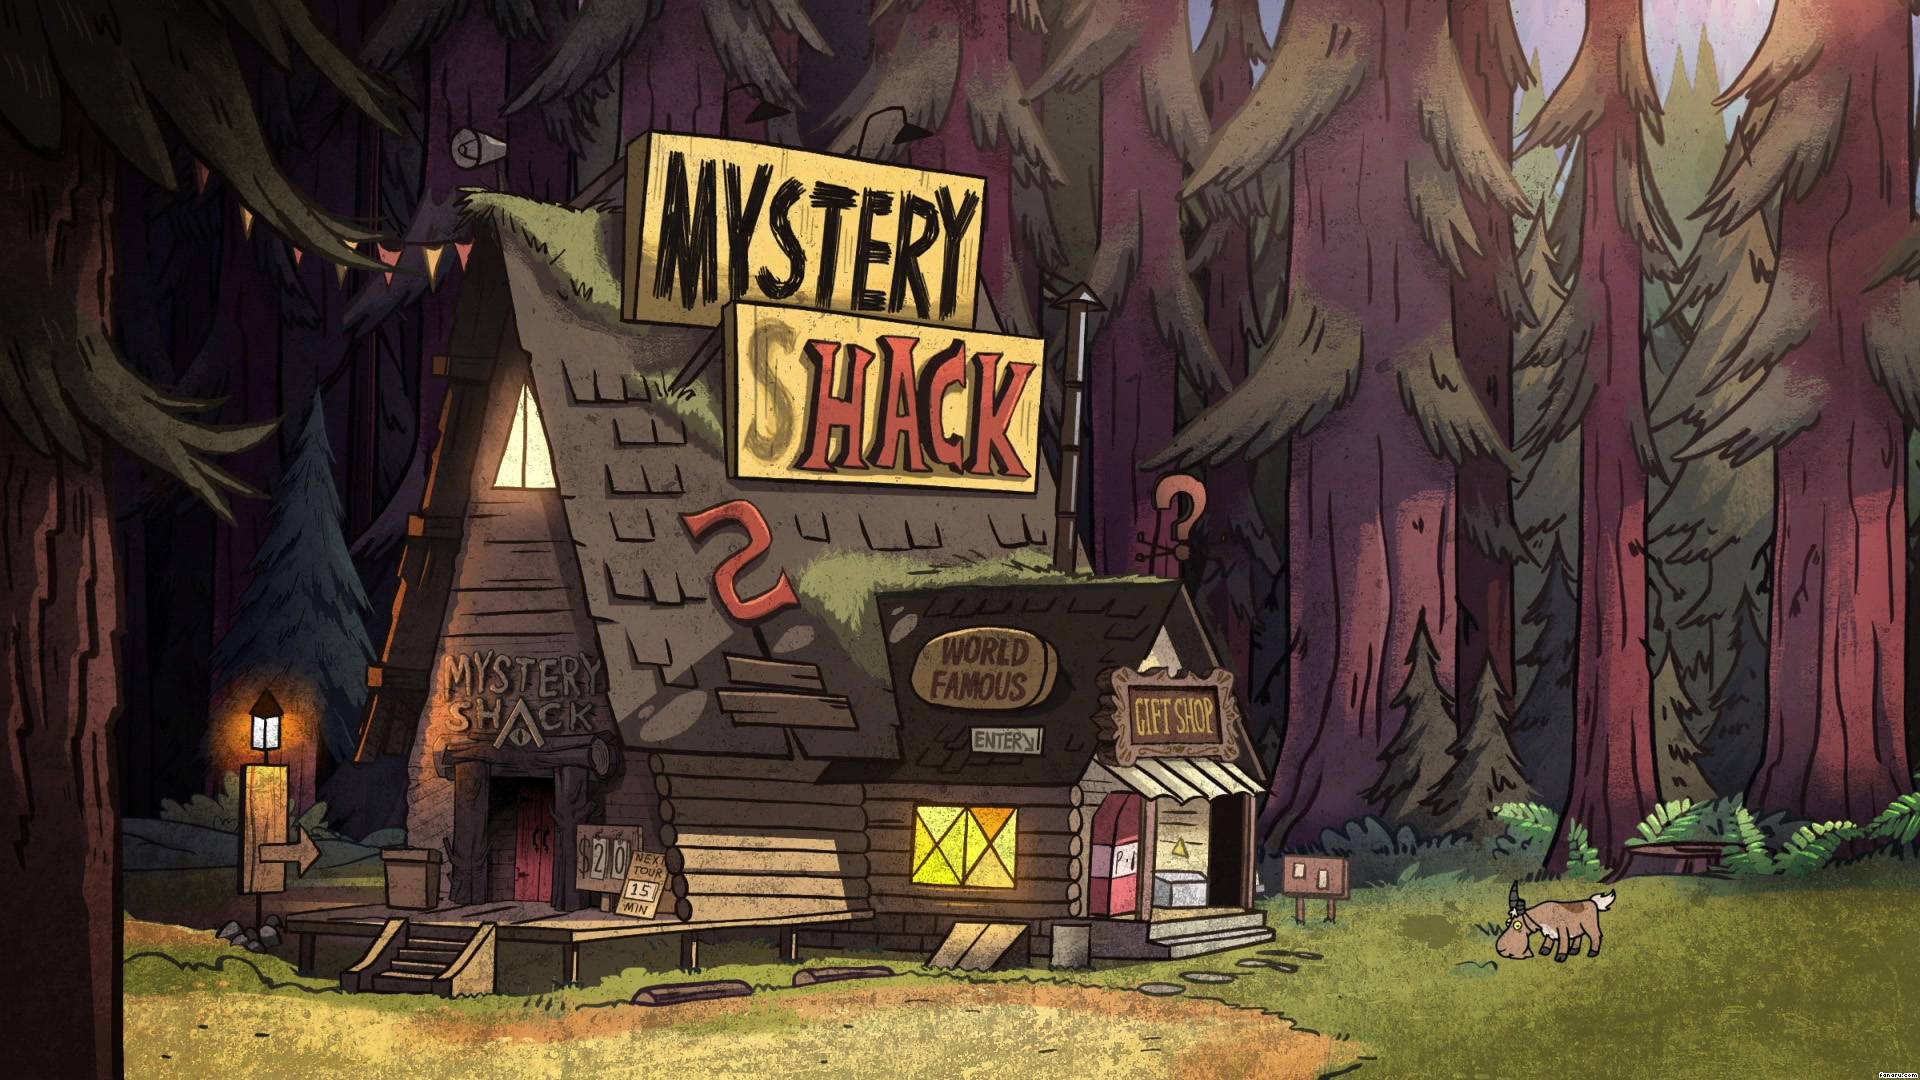 Gravity Falls Wallpaper Wallpaper Background of Your Choice